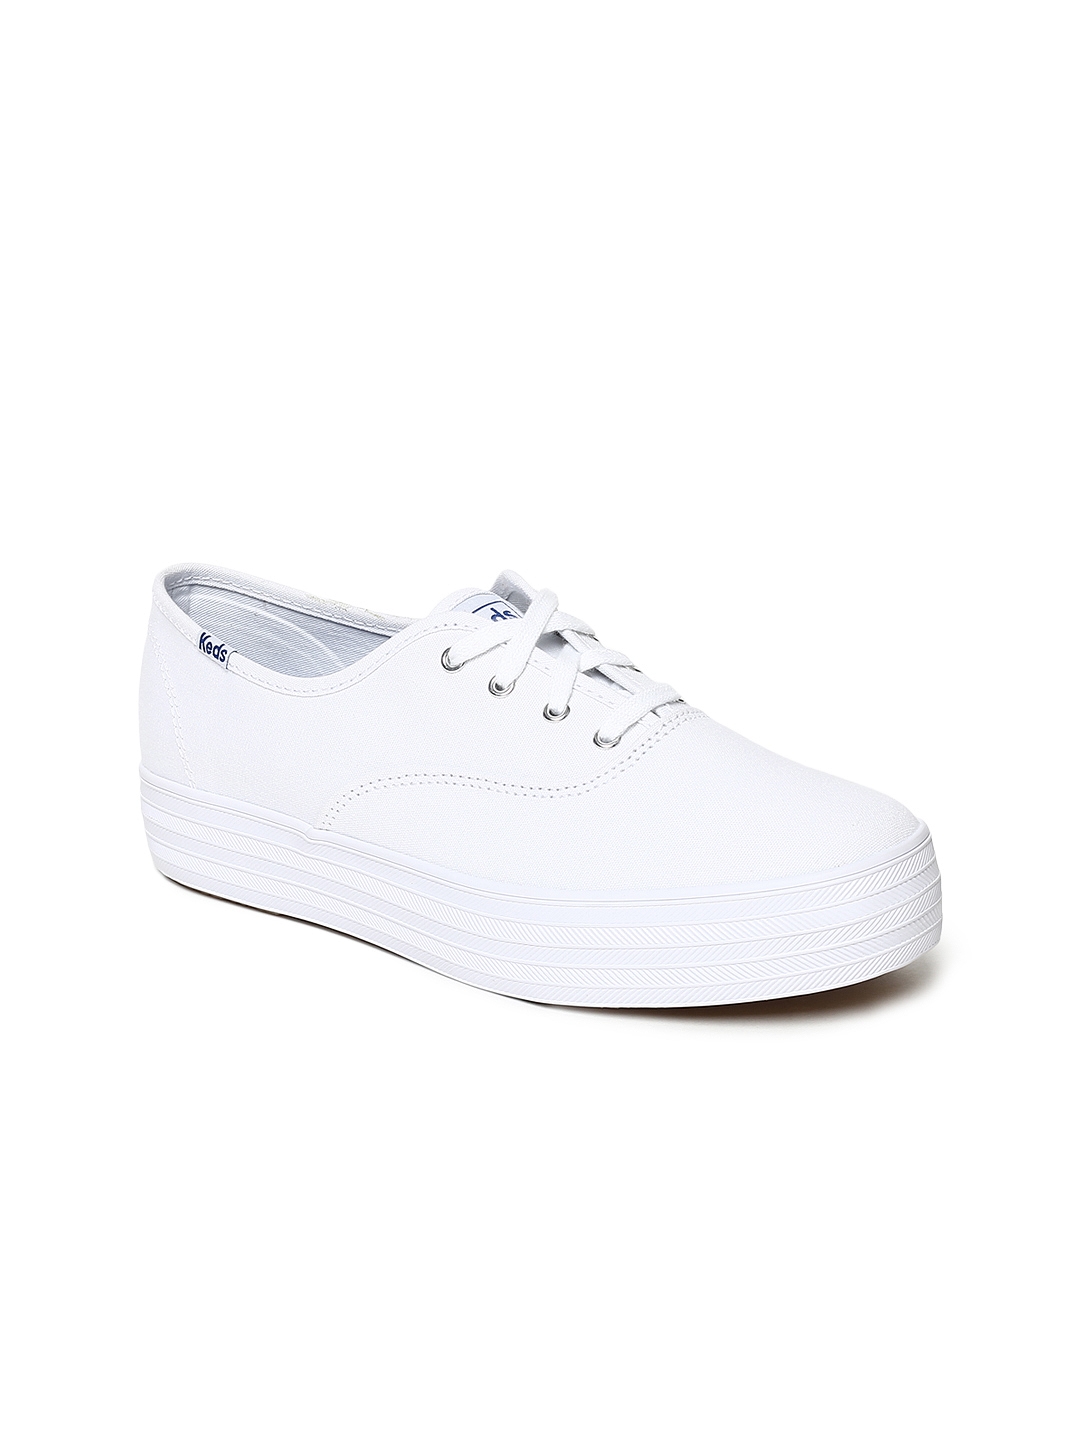 Buy Keds Women White Sneakers - Casual Shoes for Women 9161807 | Myntra